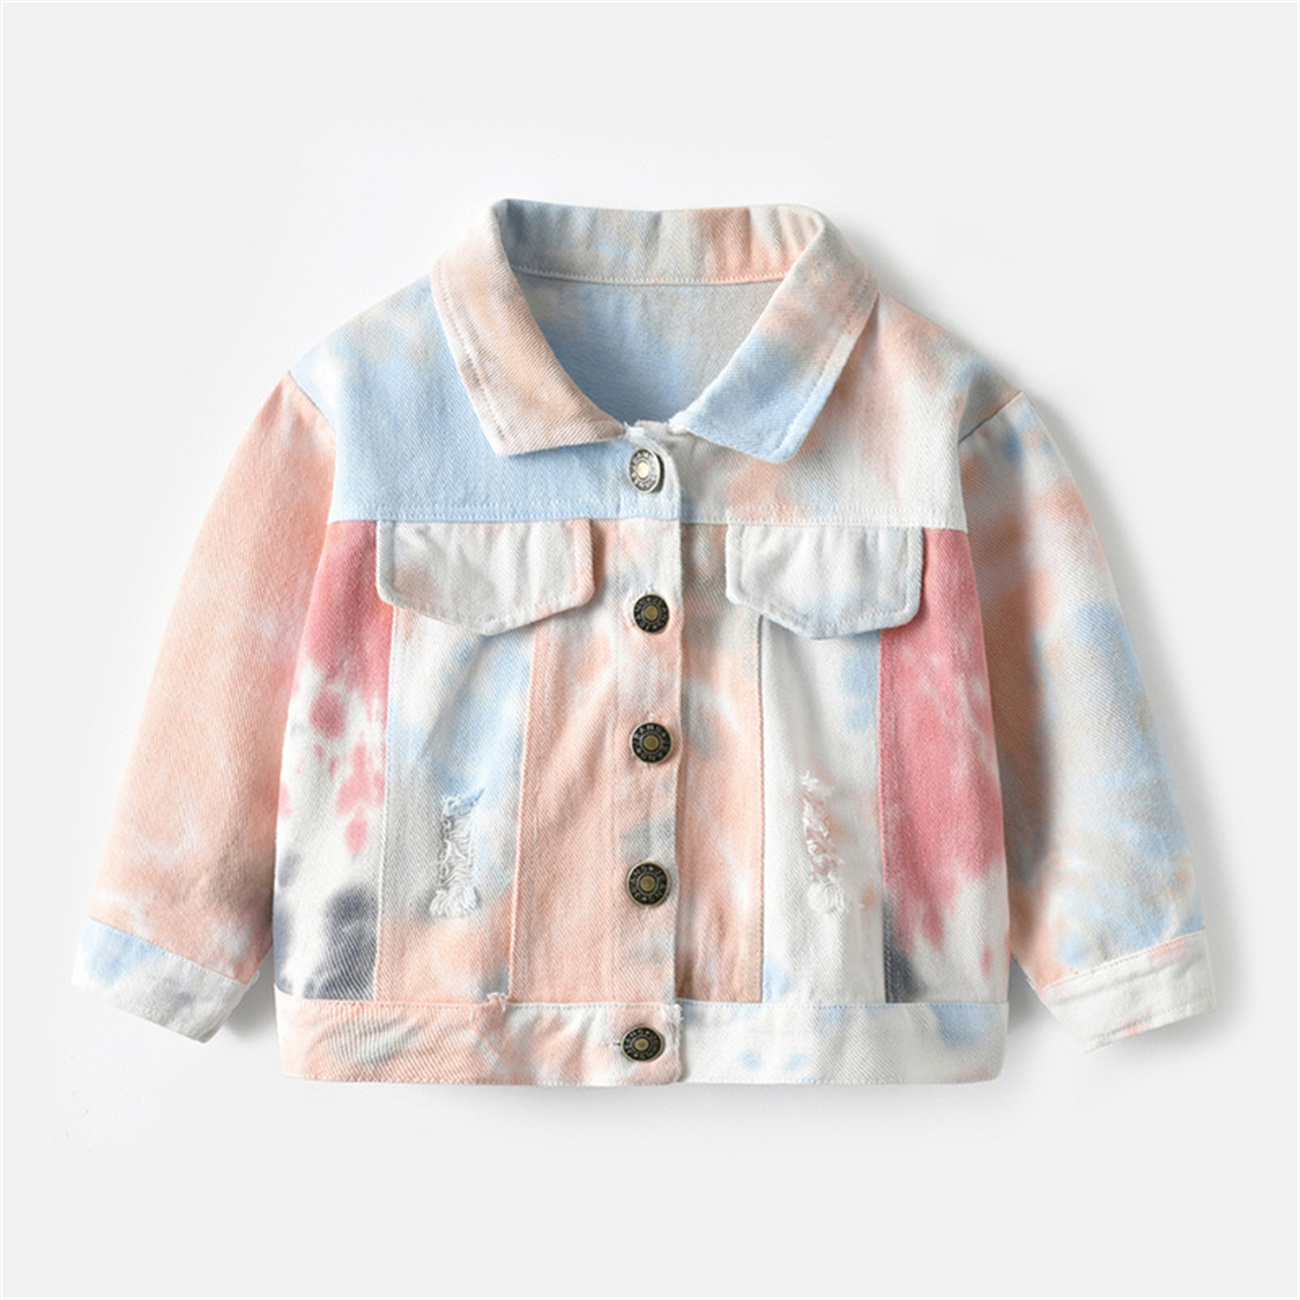 Toddler Tie-dye Denim Jean Jacket for Girls Boys Size 1-7T Single-breasted Mid-length Jacket for Spring Fall,Beige,1-2 Years - image 1 of 1